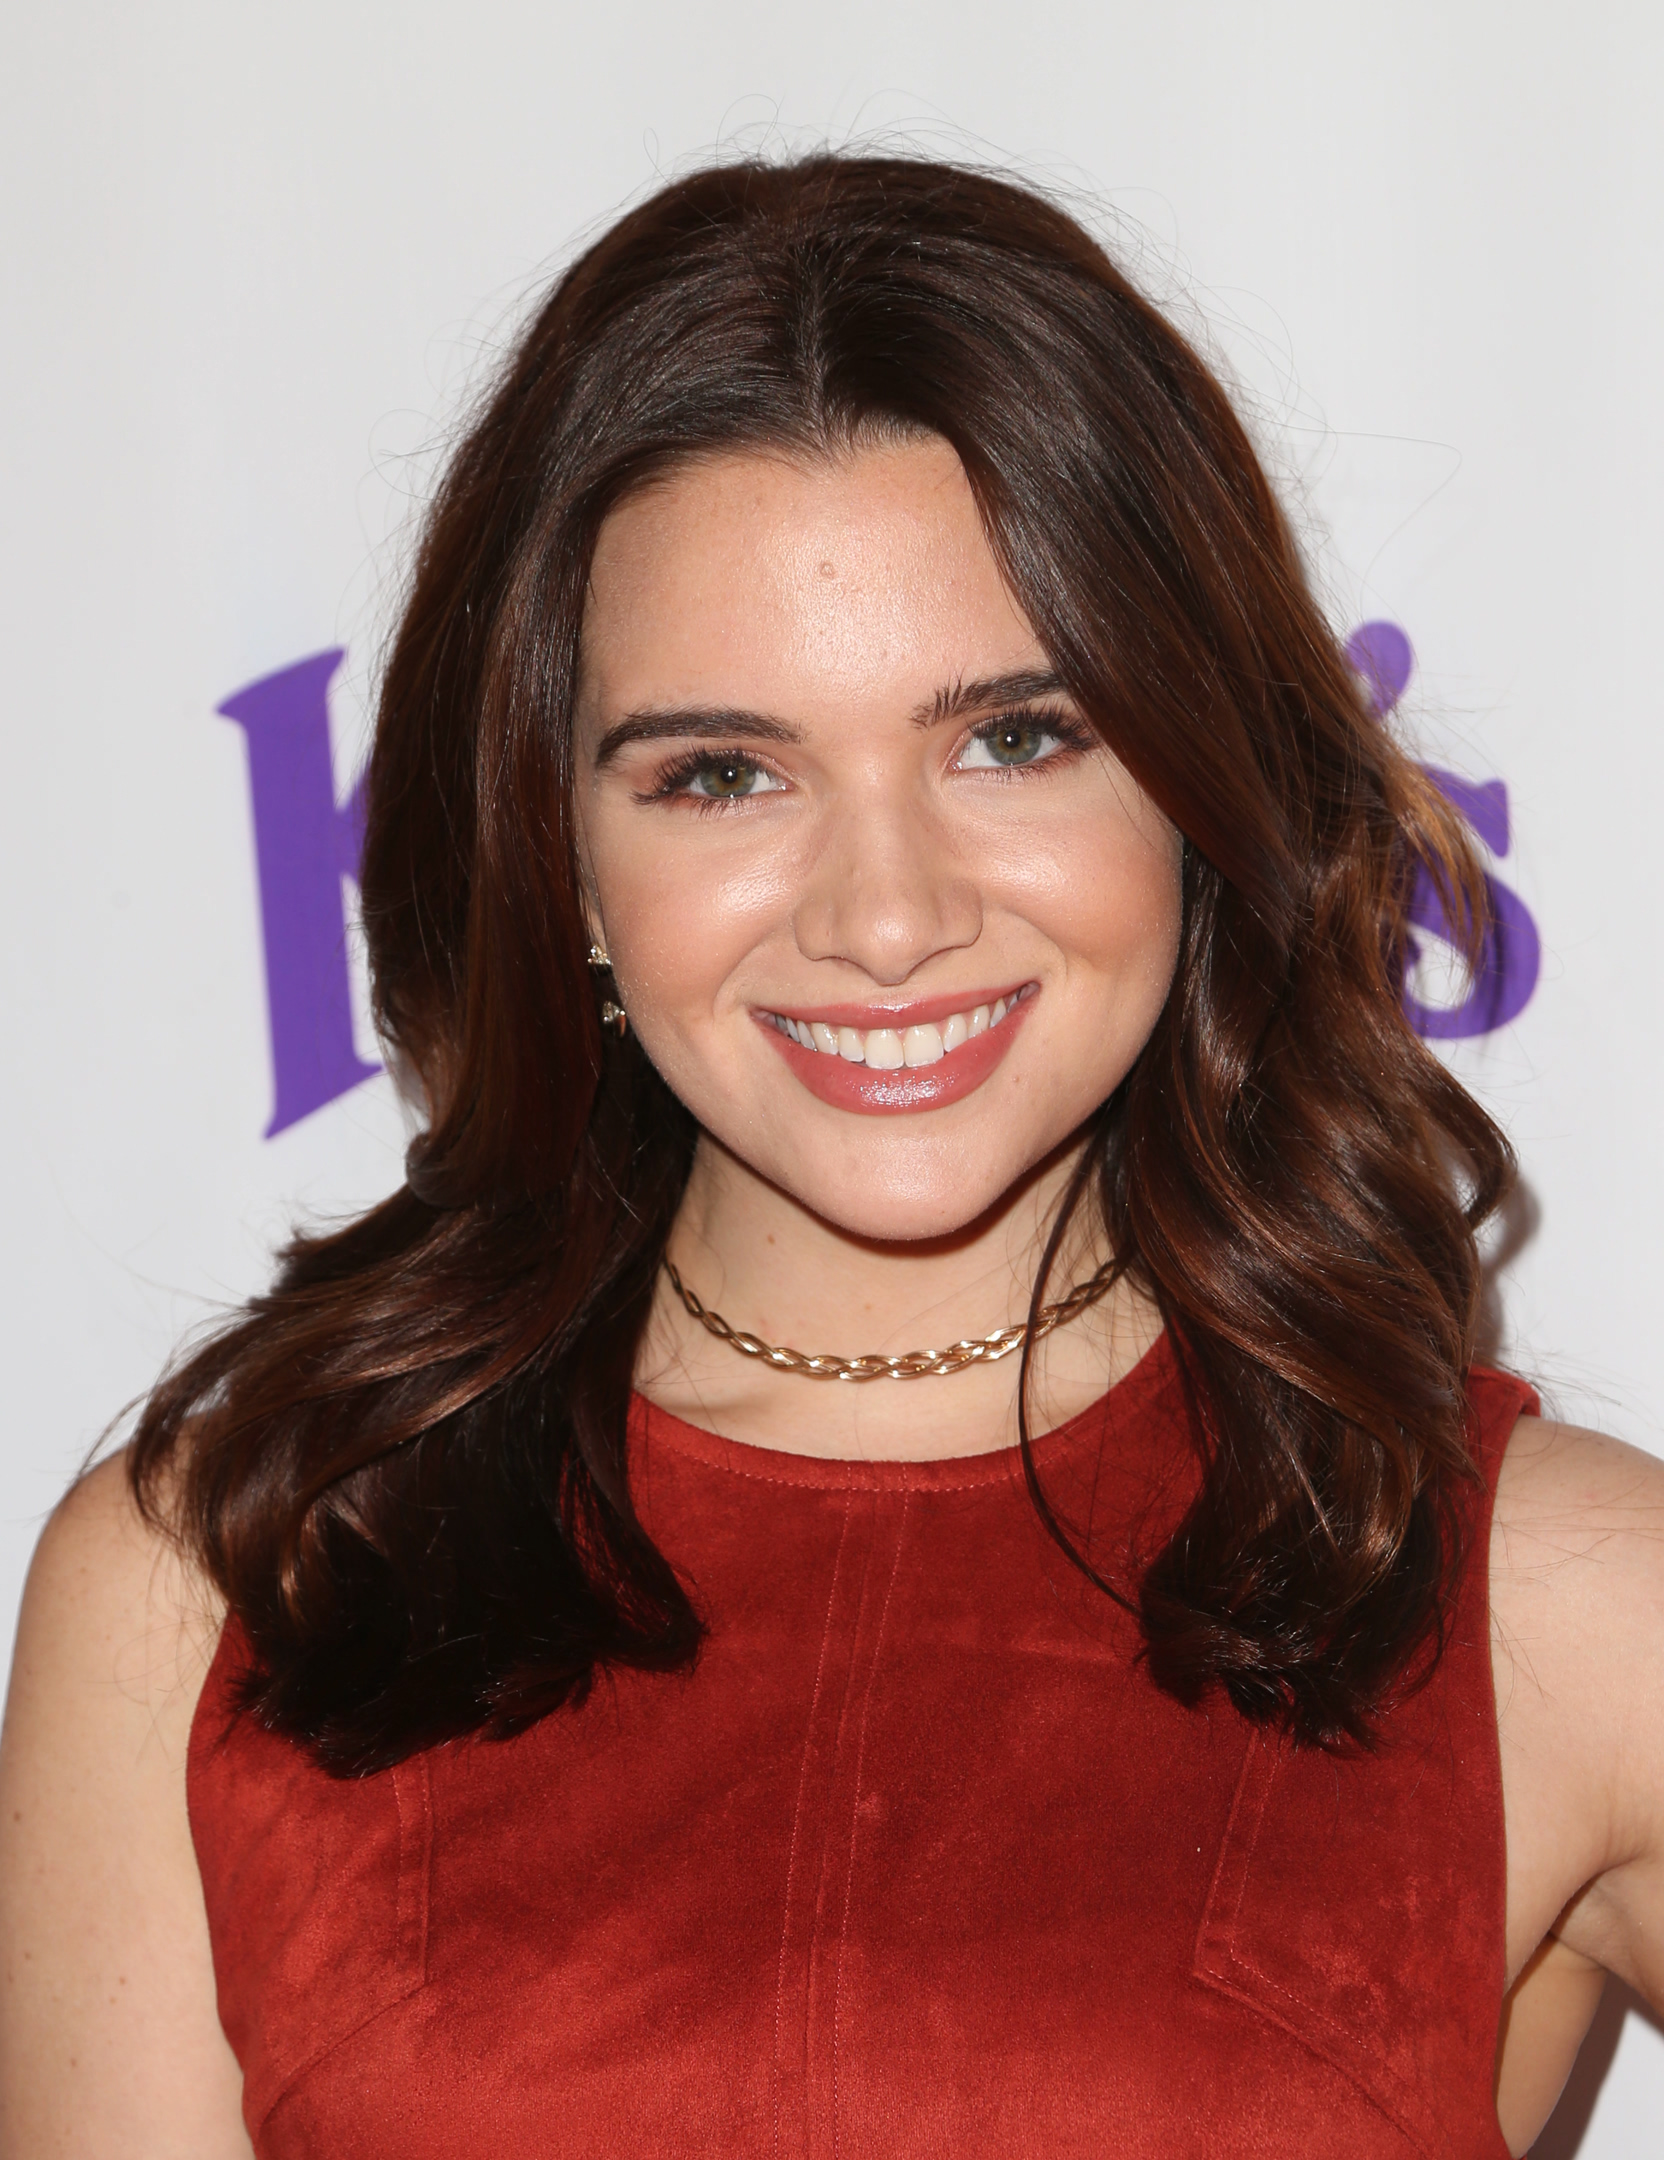 katie-stevens-ghostrider-reopening-at-knotts-berry-farm-on-642016-in-buena-park-california-13.jpg